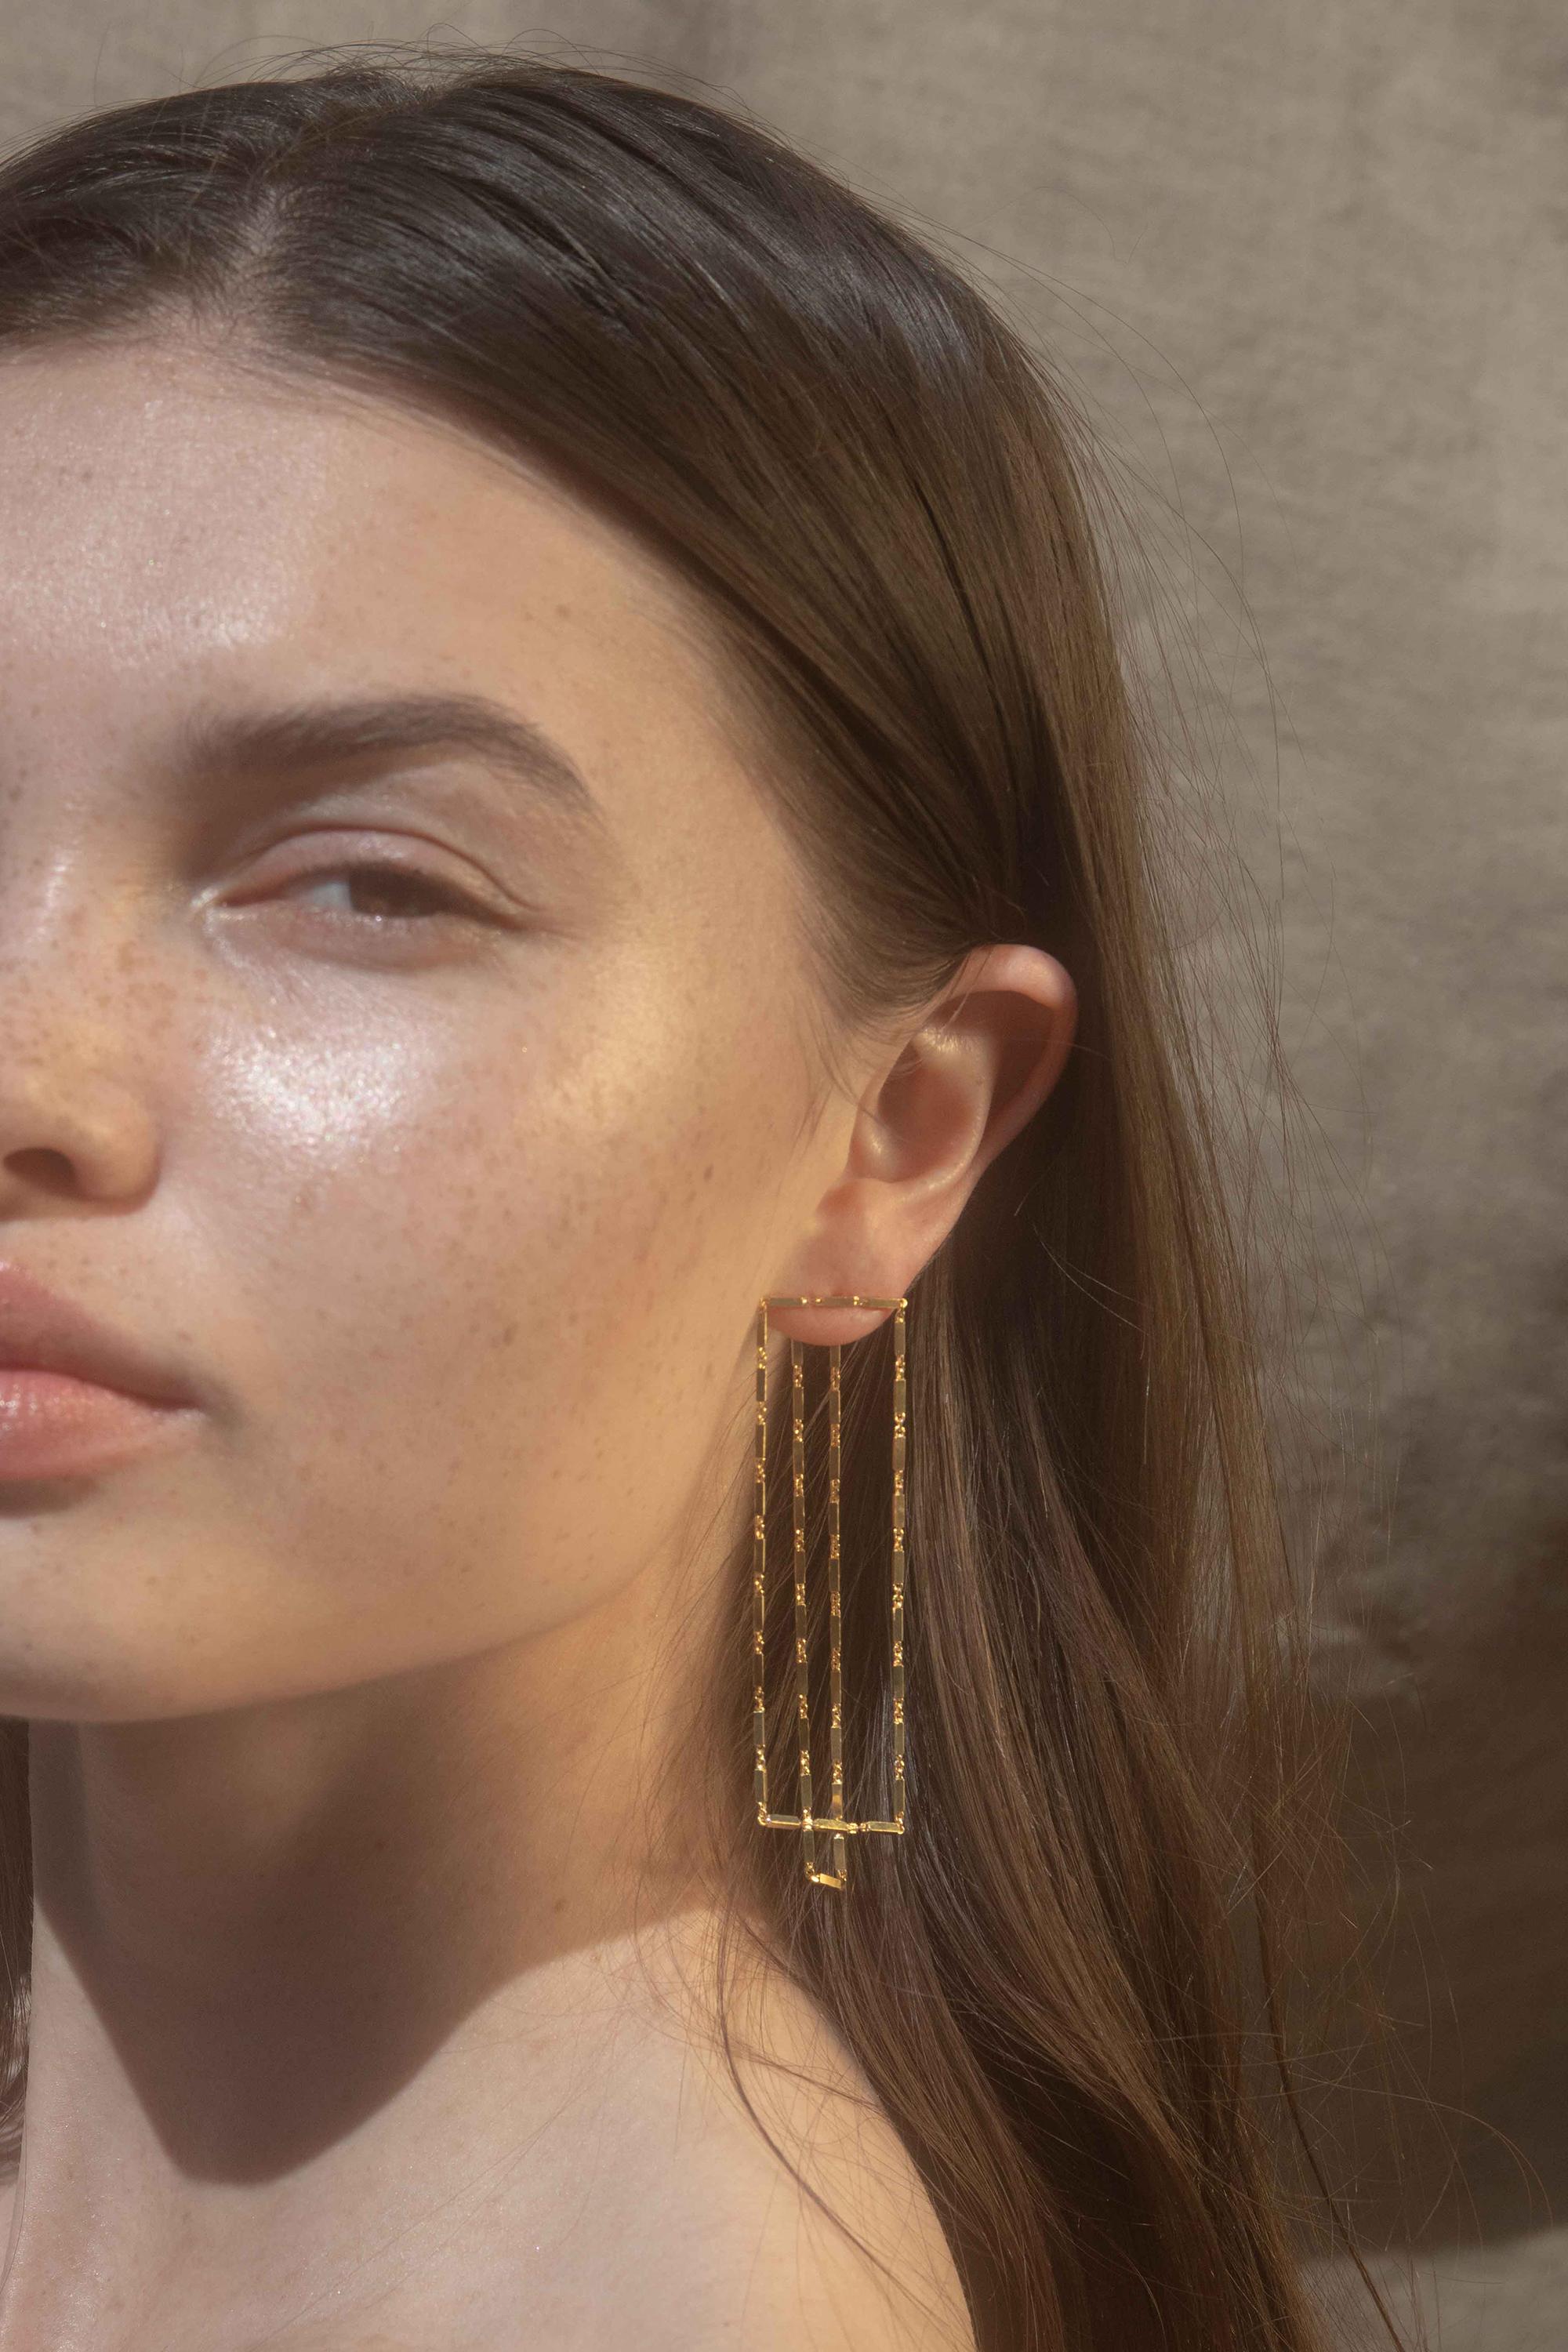 Disco EXTRA earrings 

18 karat gold plated sterling silver chain earrings that consists of rectangular motifs linked to each other. These earrings are very lightweight and can be worn in all occasions. Model is wearing silver version.

Hand-crafted